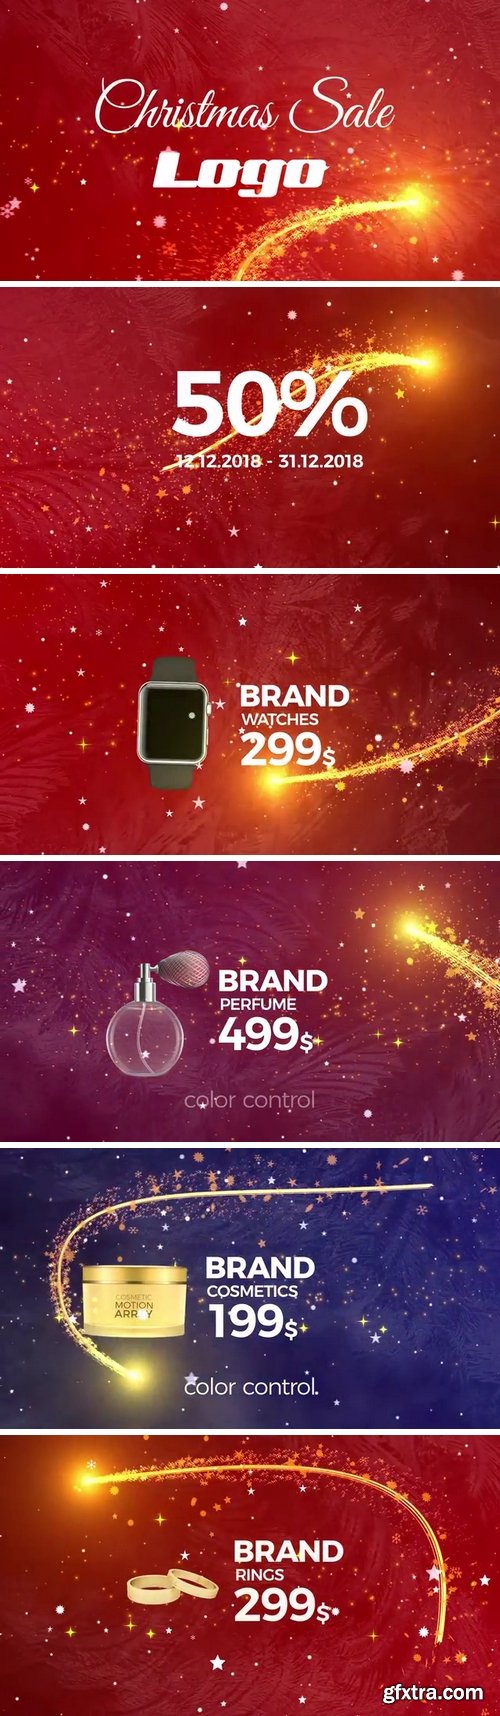 MA - Christmas Sale Promo After Effects Templates 151303